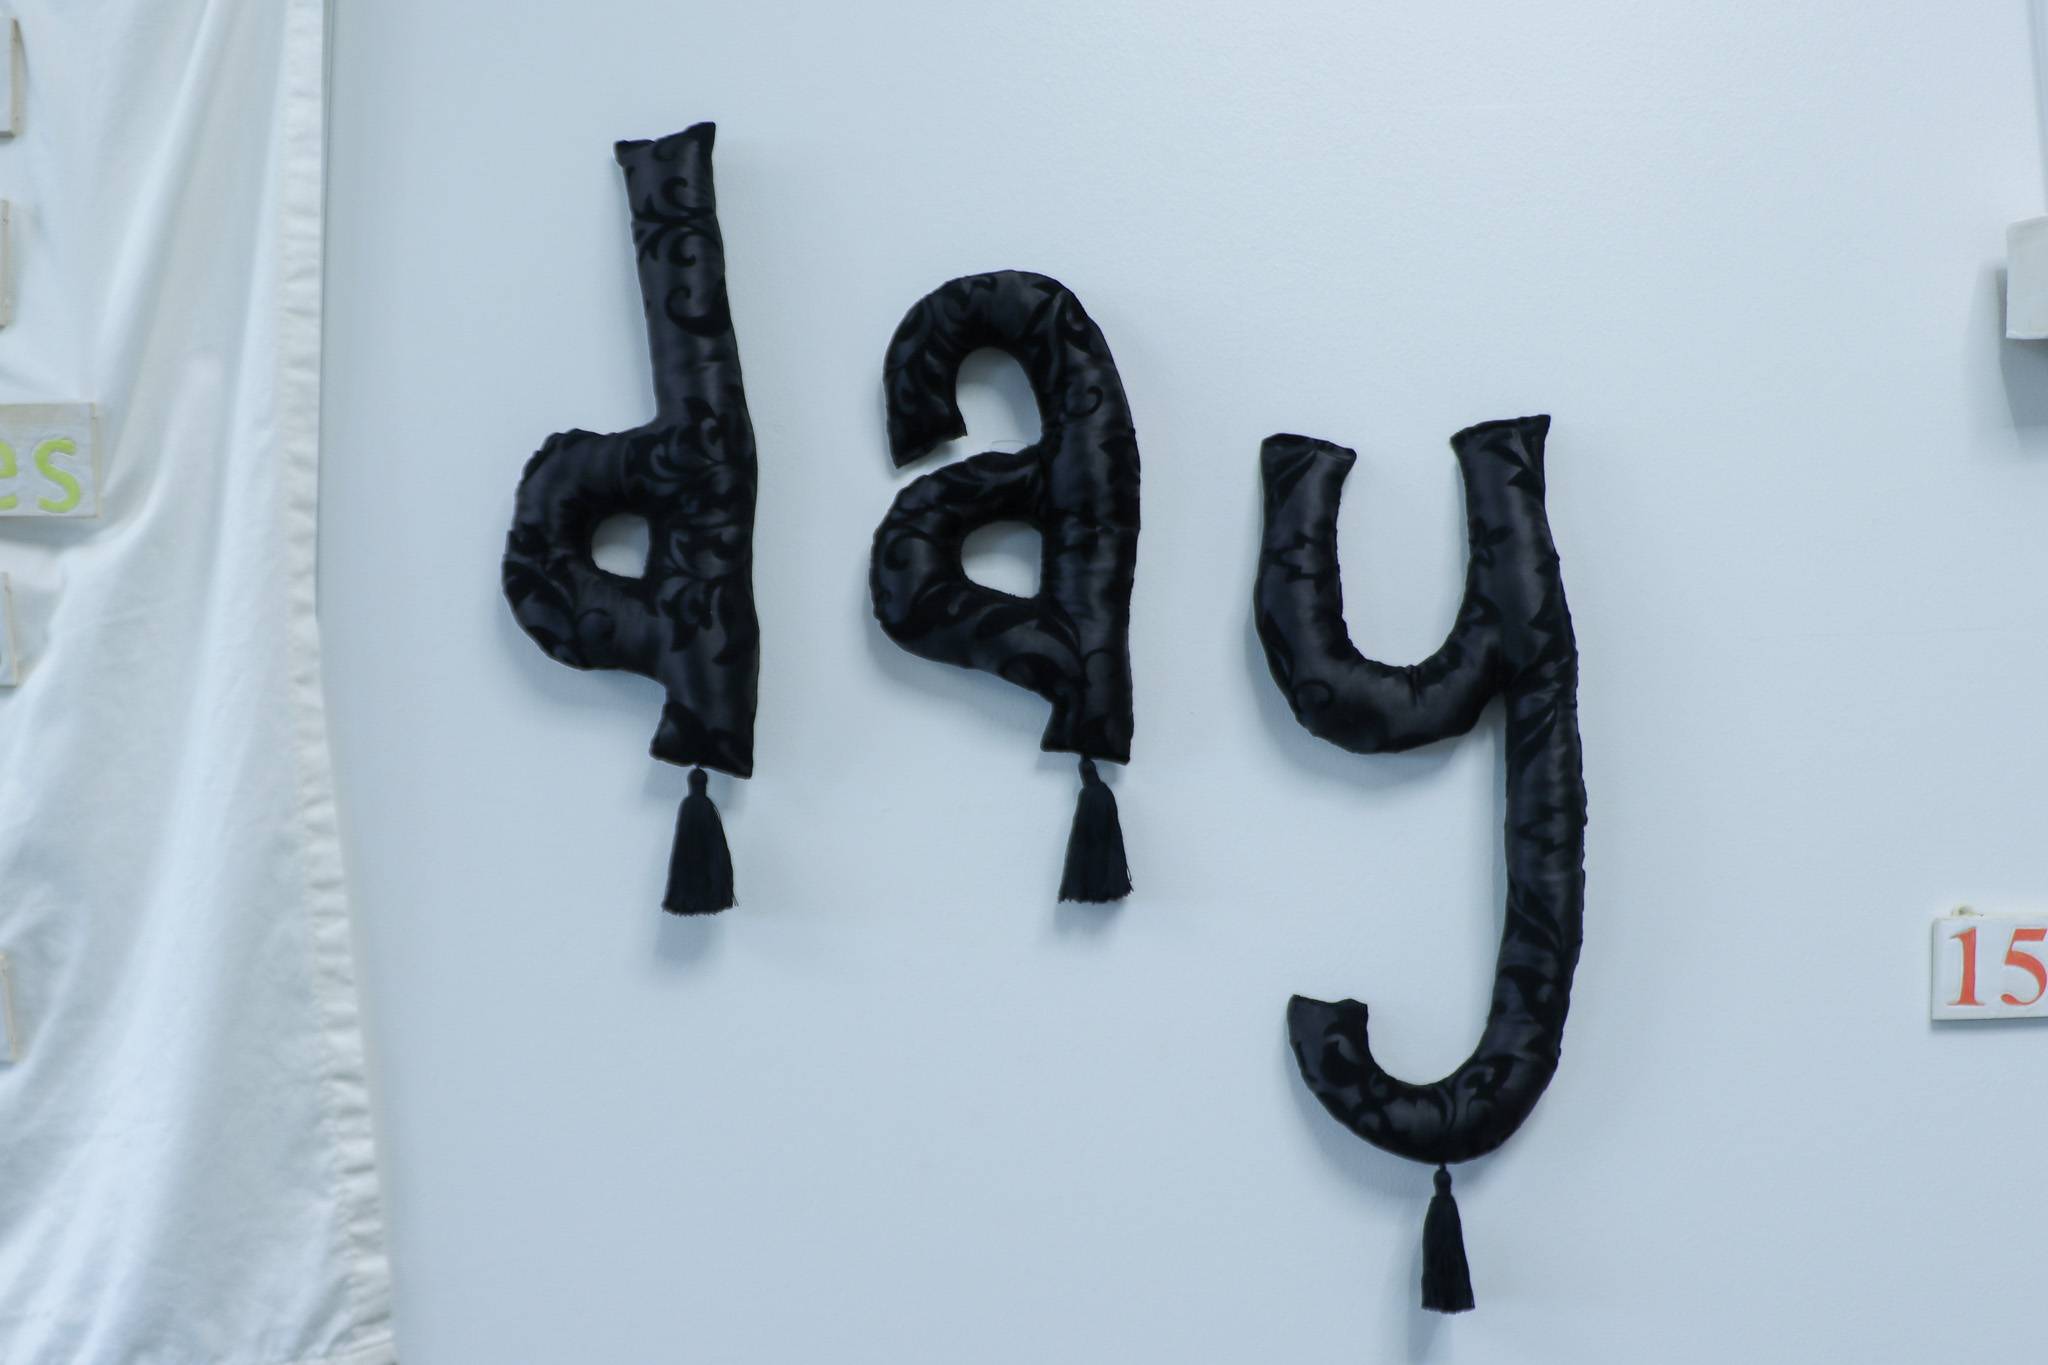 "Day"